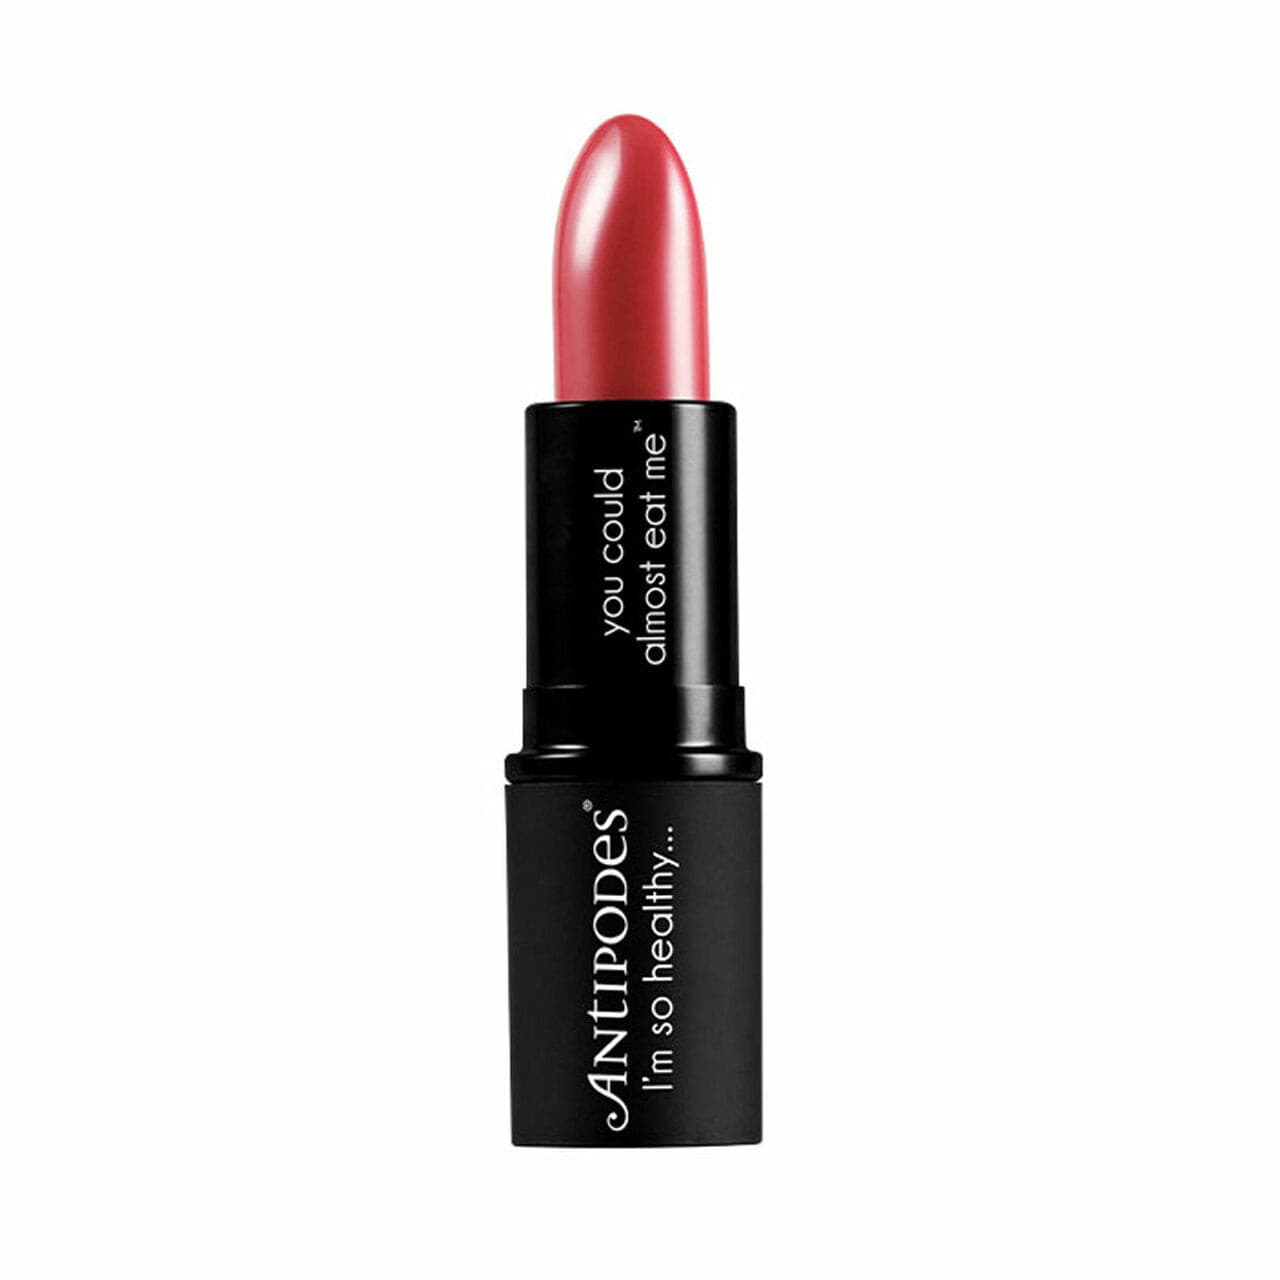 Antipodes Moisture-Boost Natural Lipstick 4g - Remarkably Red.